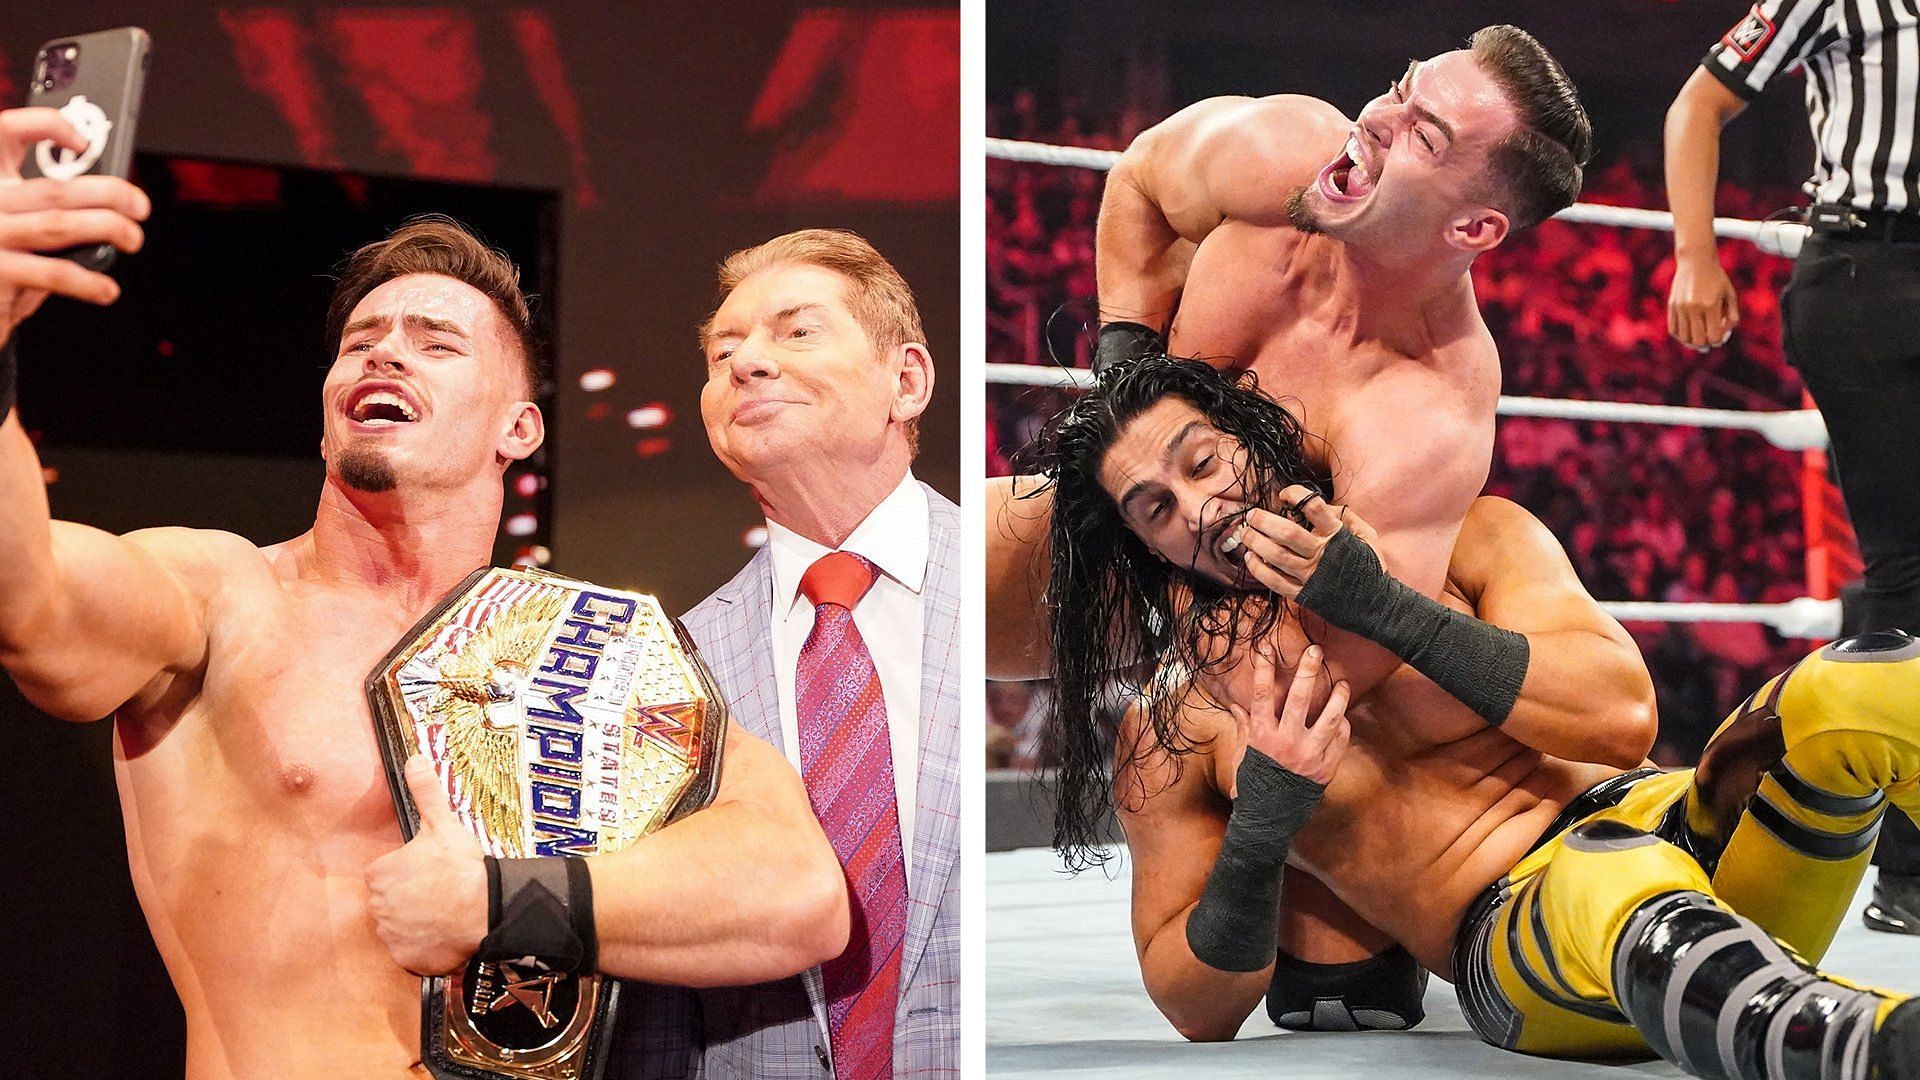 Who could dethrone Theory for the WWE United States Championship?